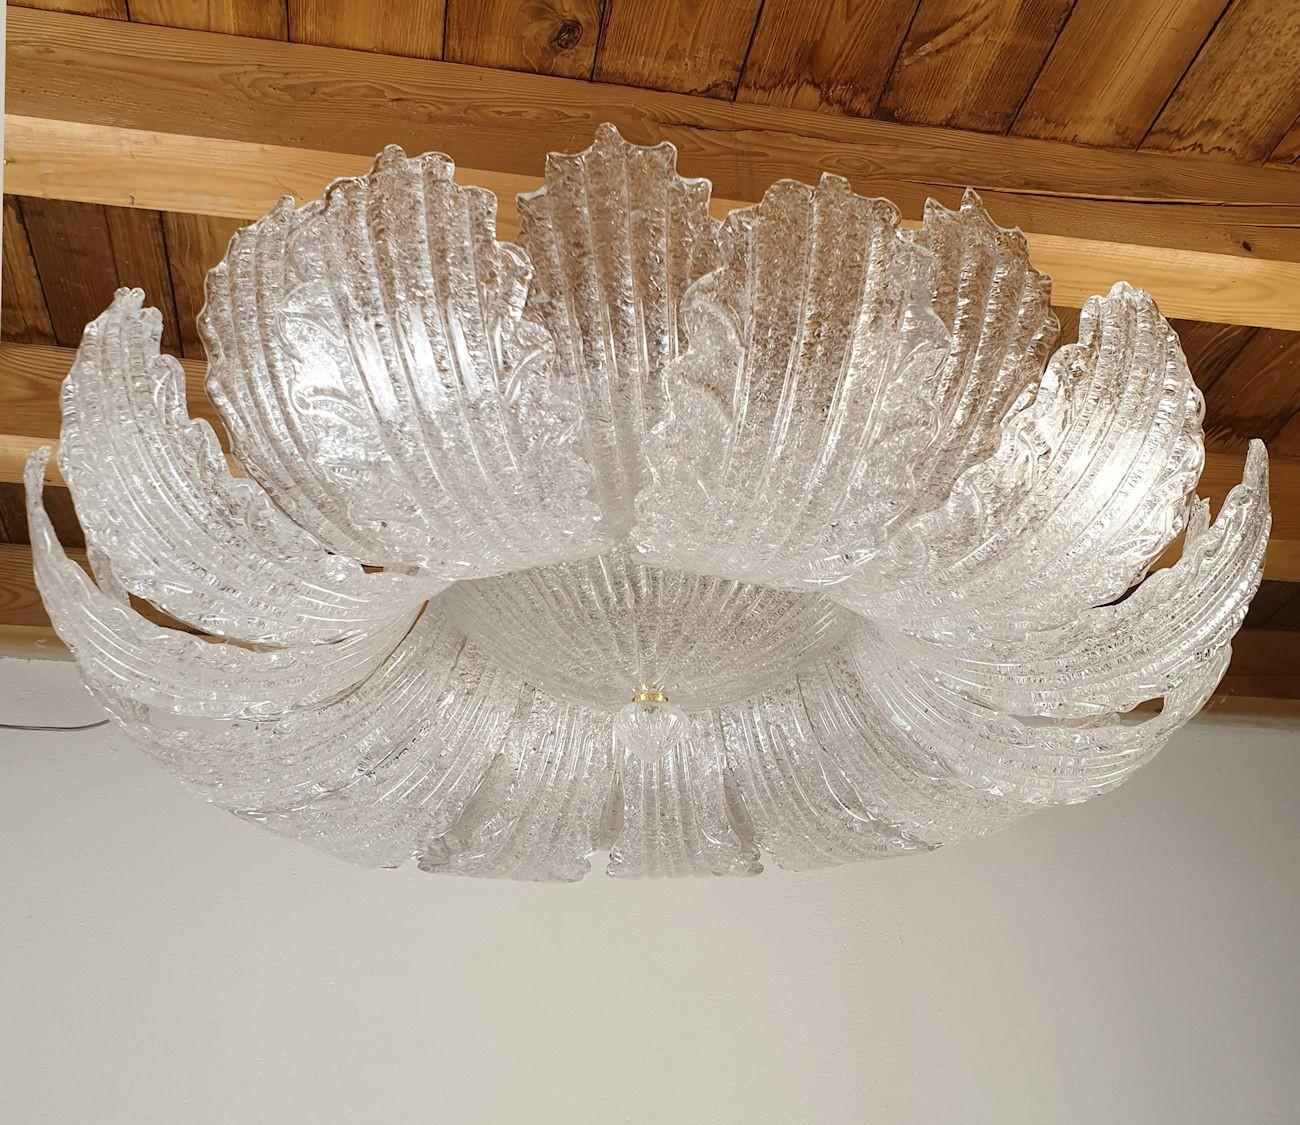 Large Mid-Century Modern Murano glass flush mount chandelier, Barovier & Toso style, Italy 1970s.
The vintage chandelier has a Neoclassical, or Transitional style.
It's made of Murano clear glass leaves, with a granulated finish, making it